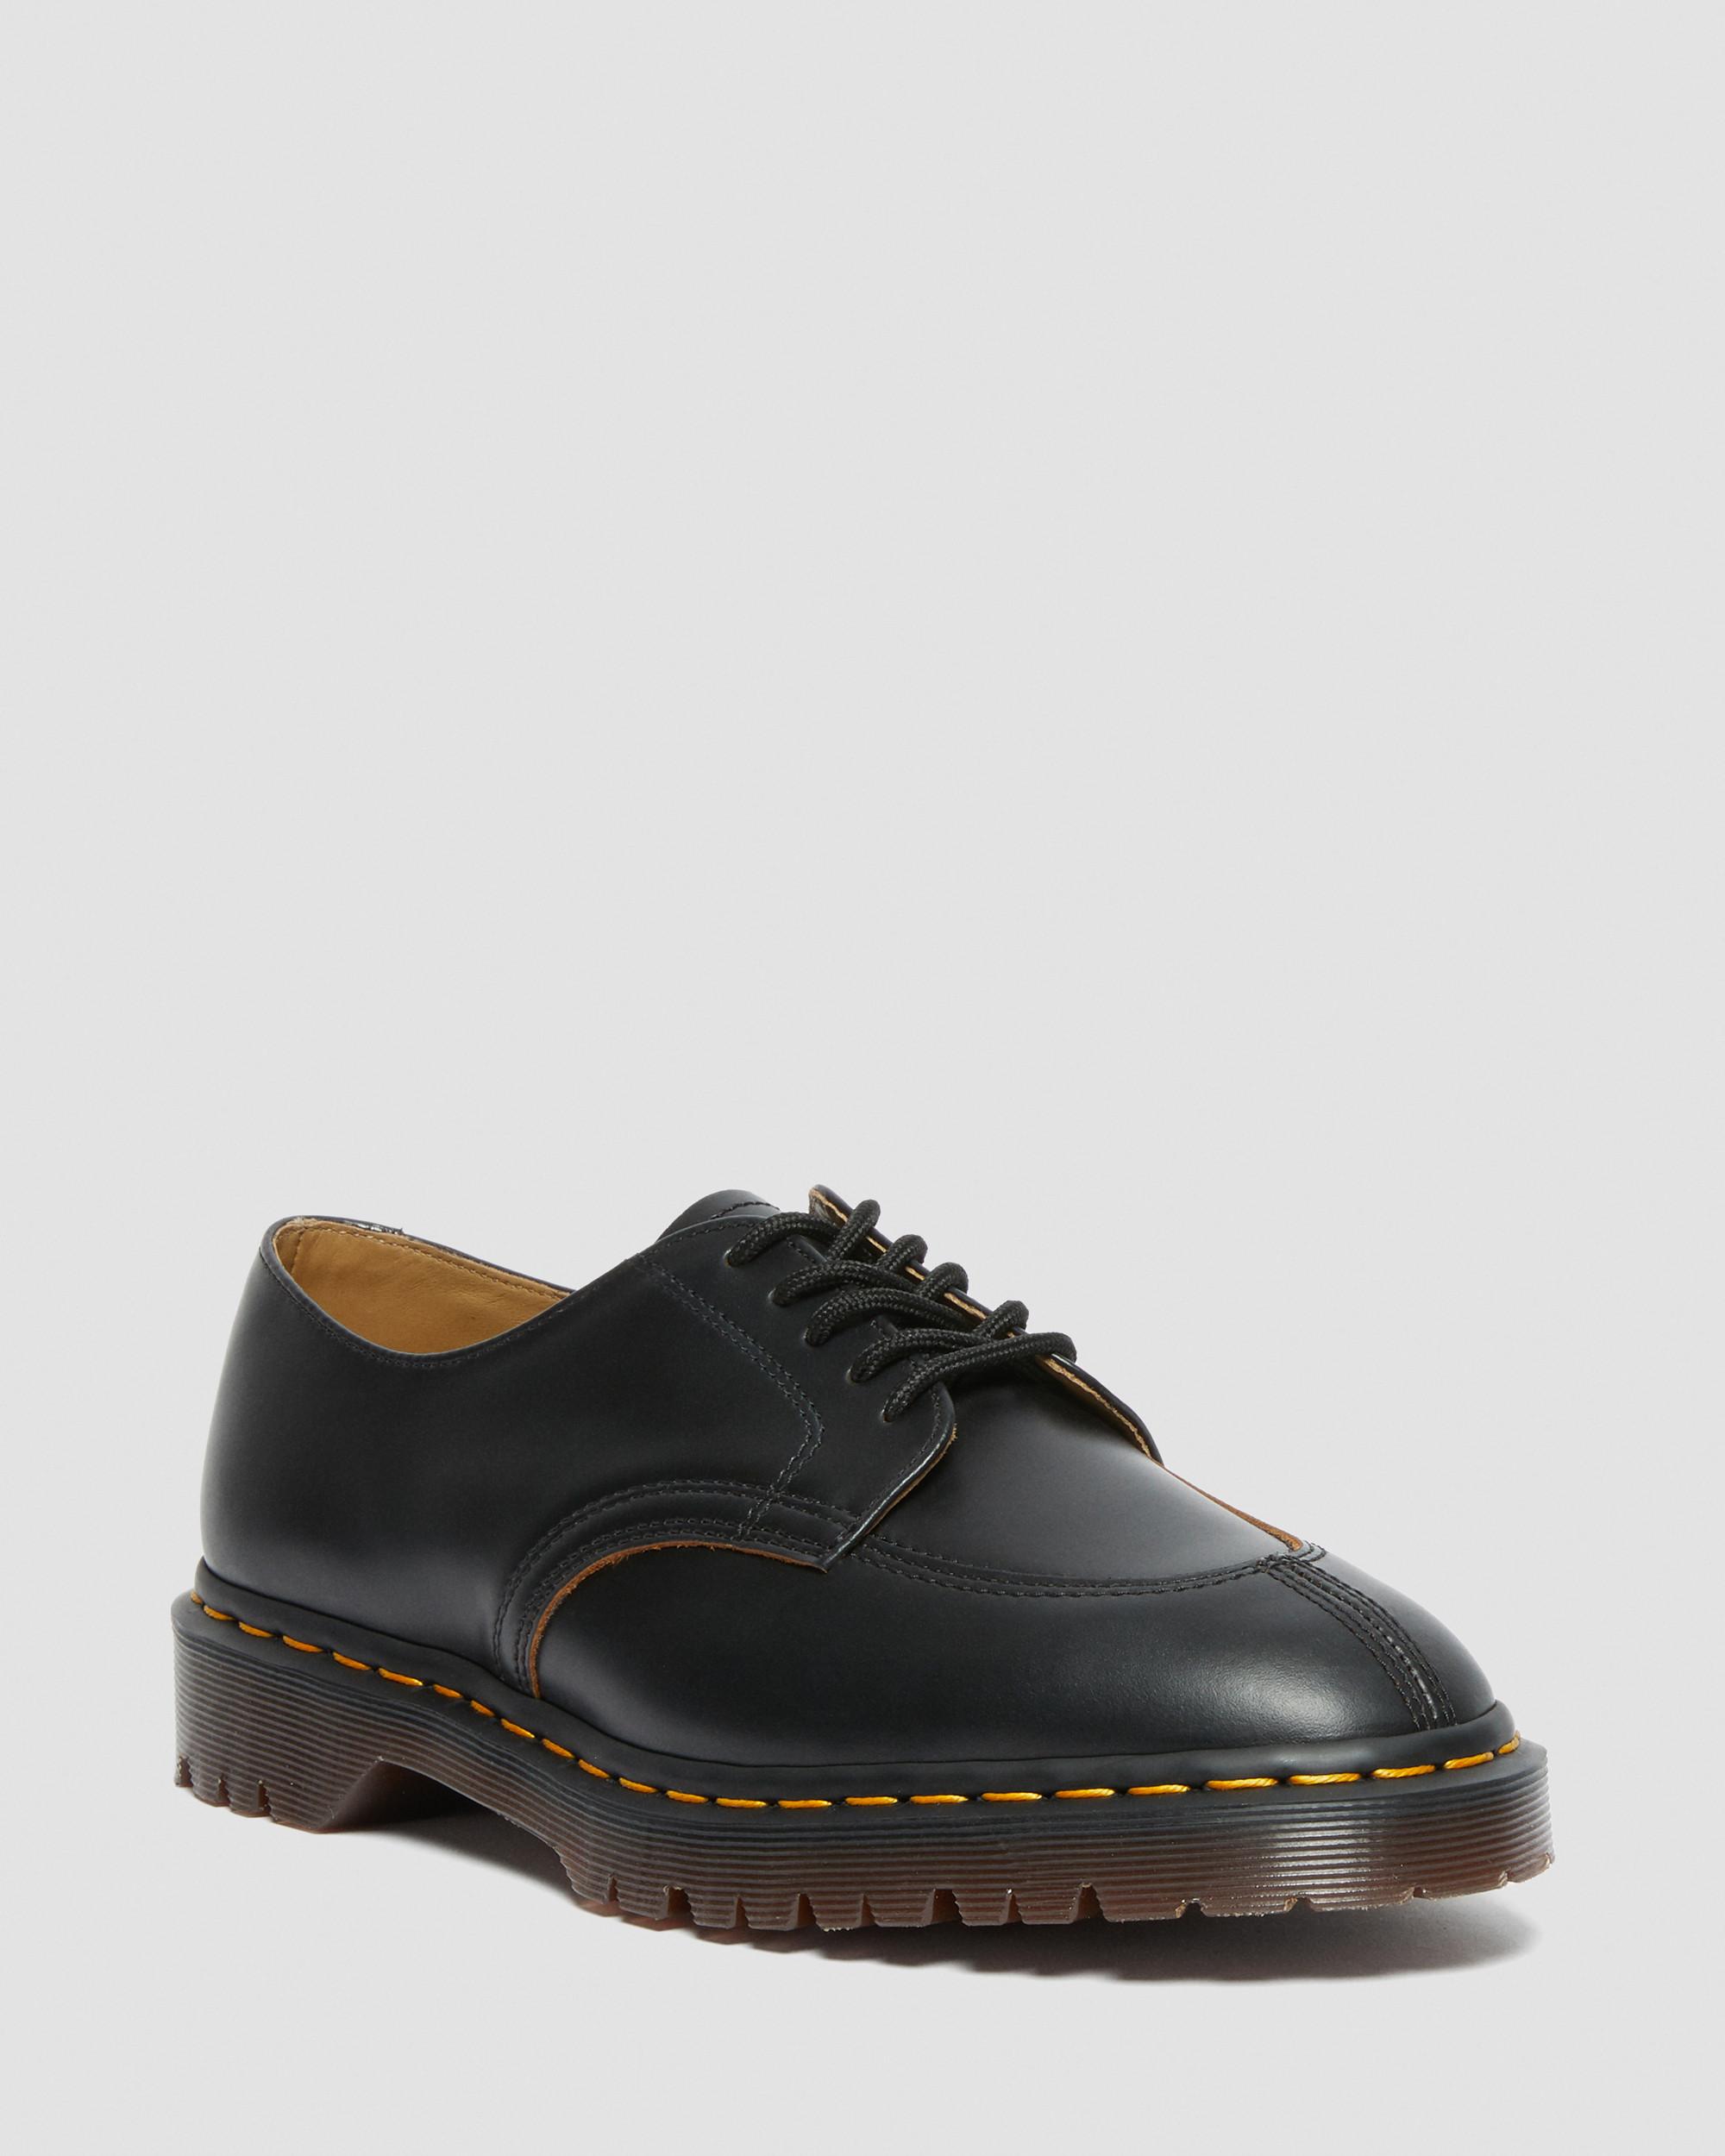 2046 Vintage Smooth Leather  Shoes2046 Vintage Smooth Leather  Shoes Dr. Martens